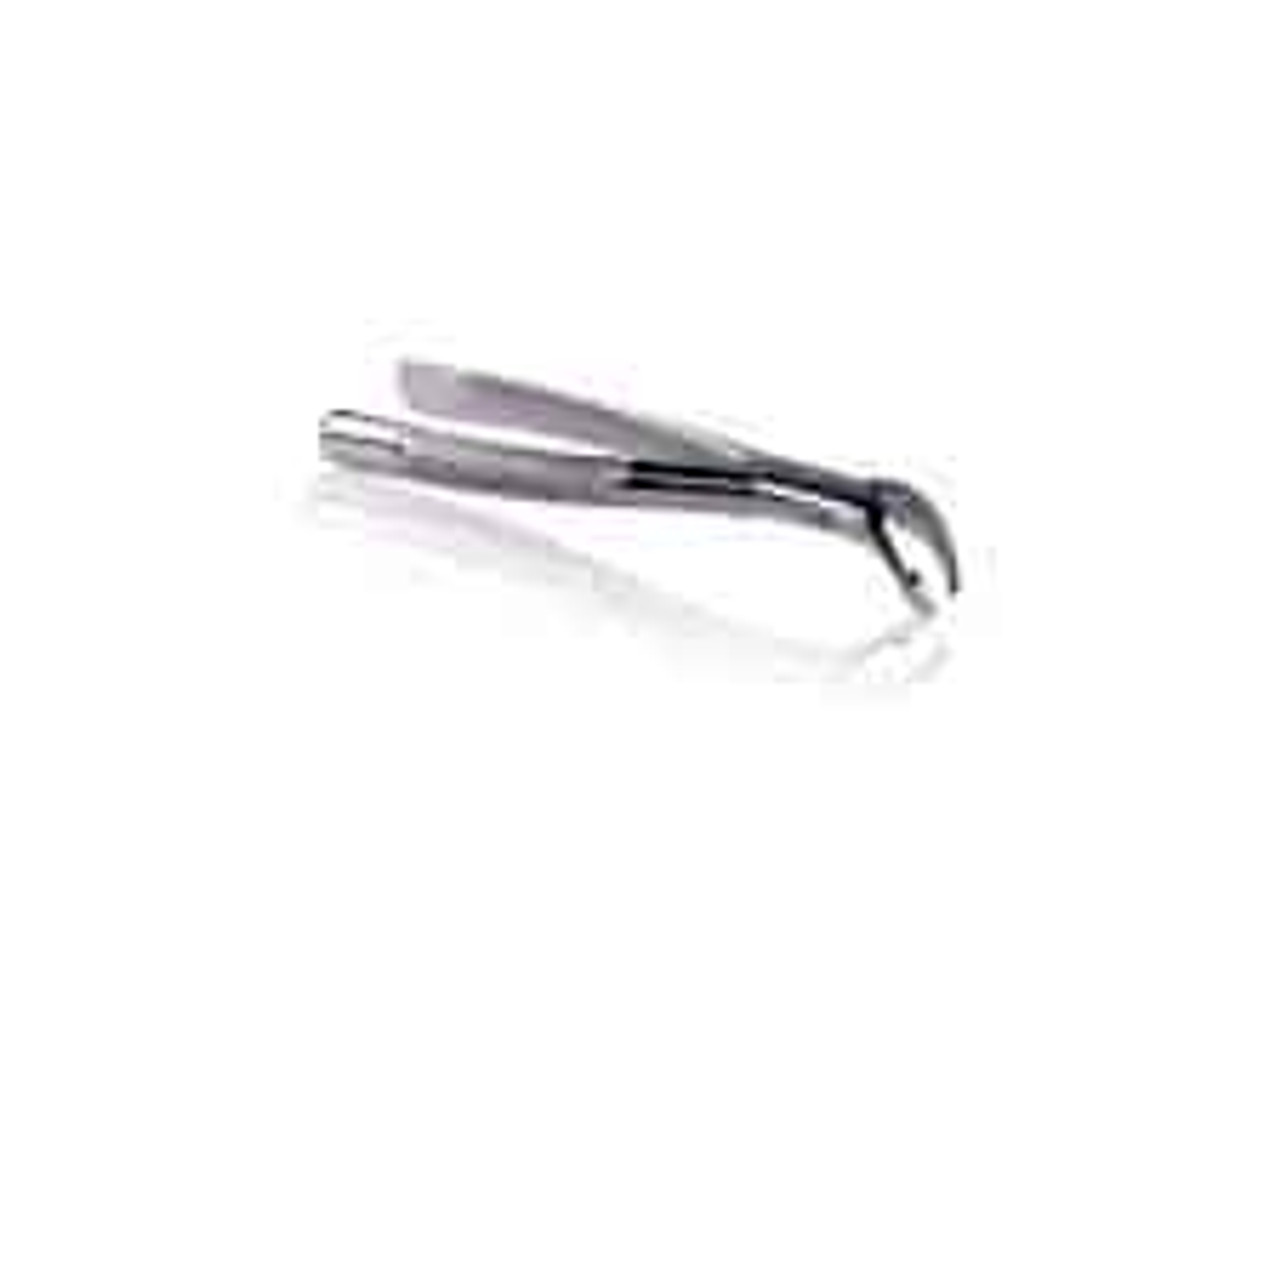 J & J Instruments - EXTRACTING FORCEPS #18R